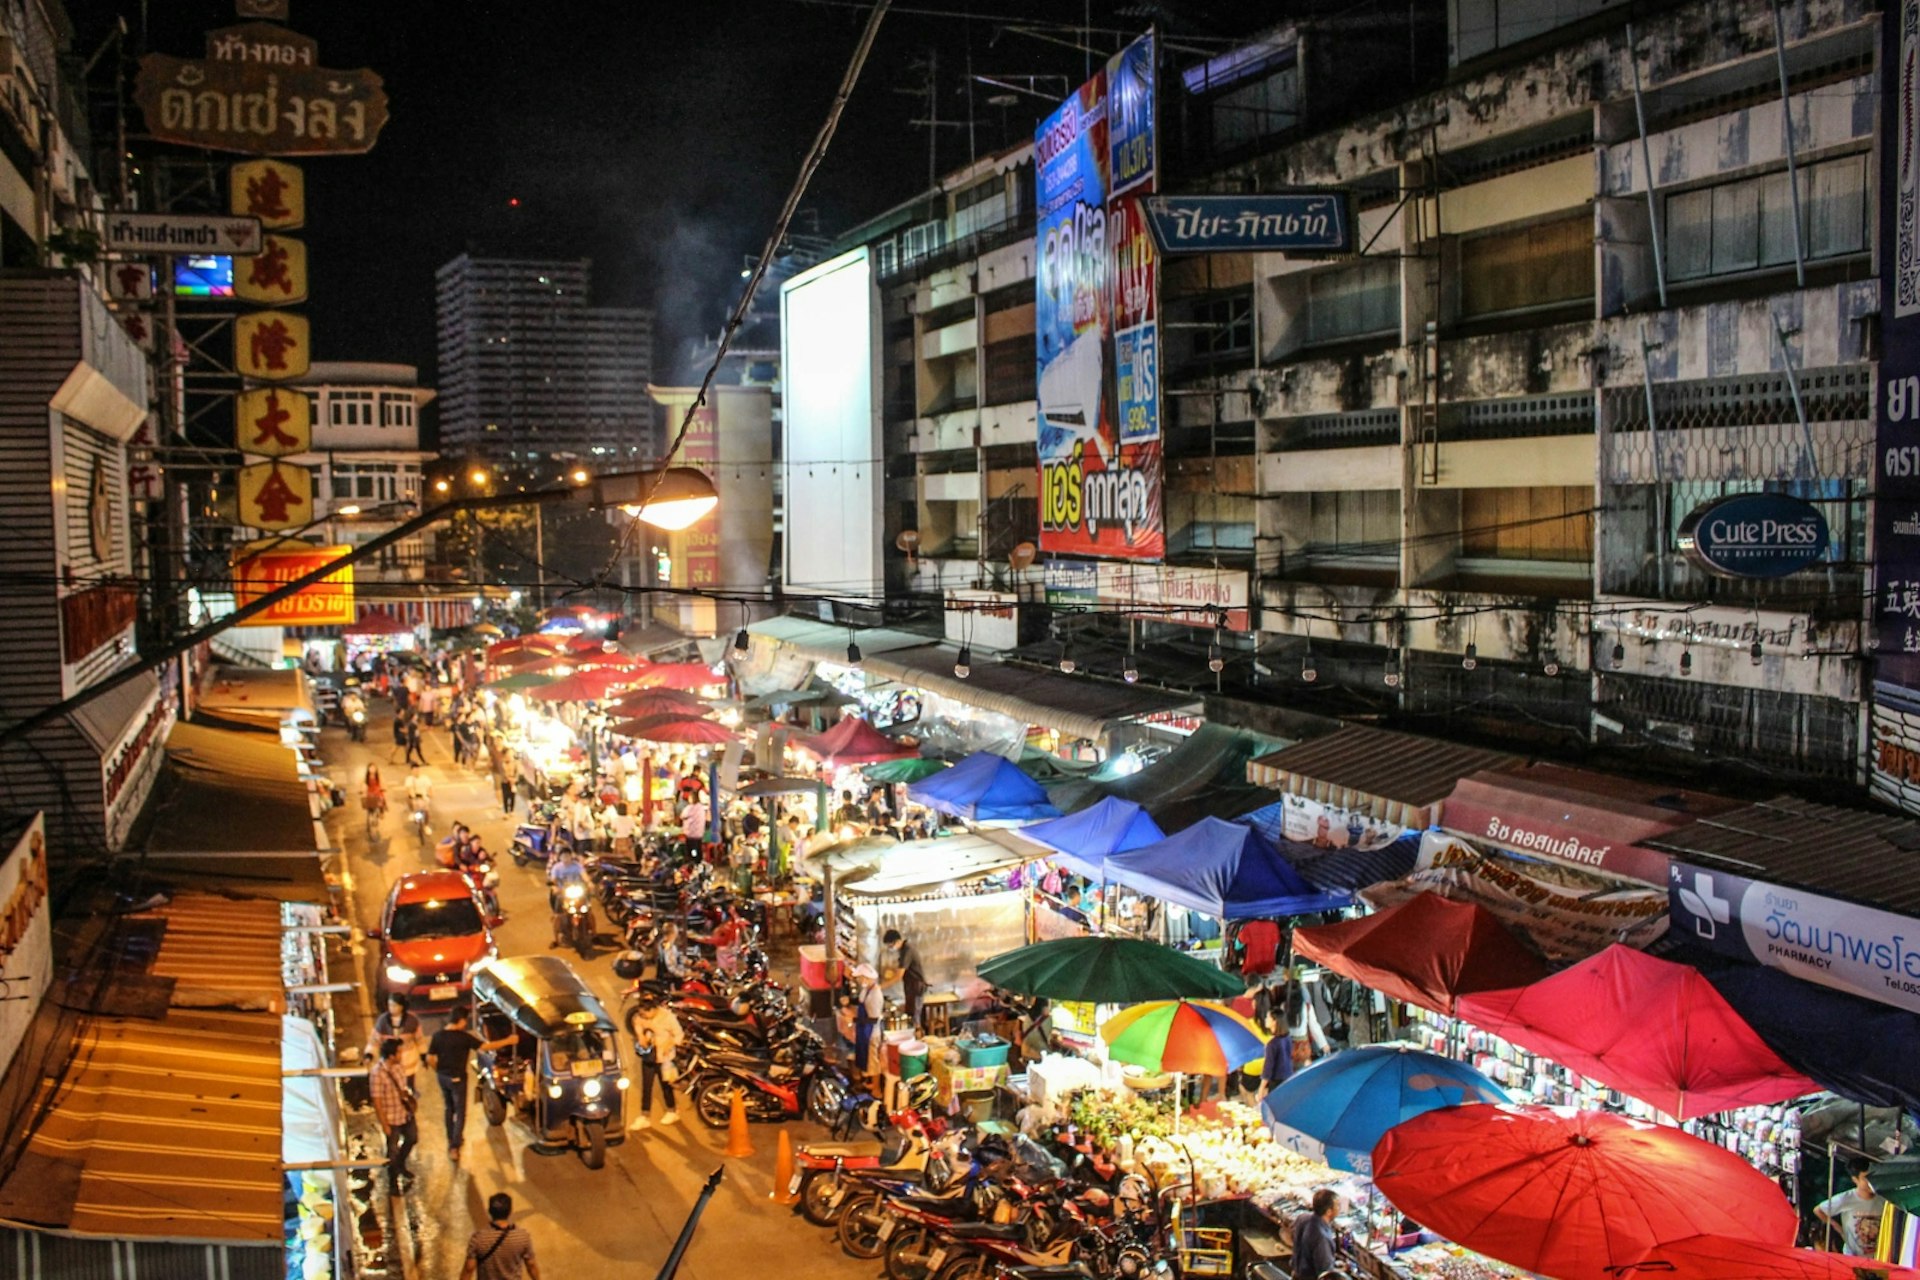 Vendors line and light up the street at Talat Warorot in Chiang Mai, Thailand © Alana Morgan / Lonely Planet